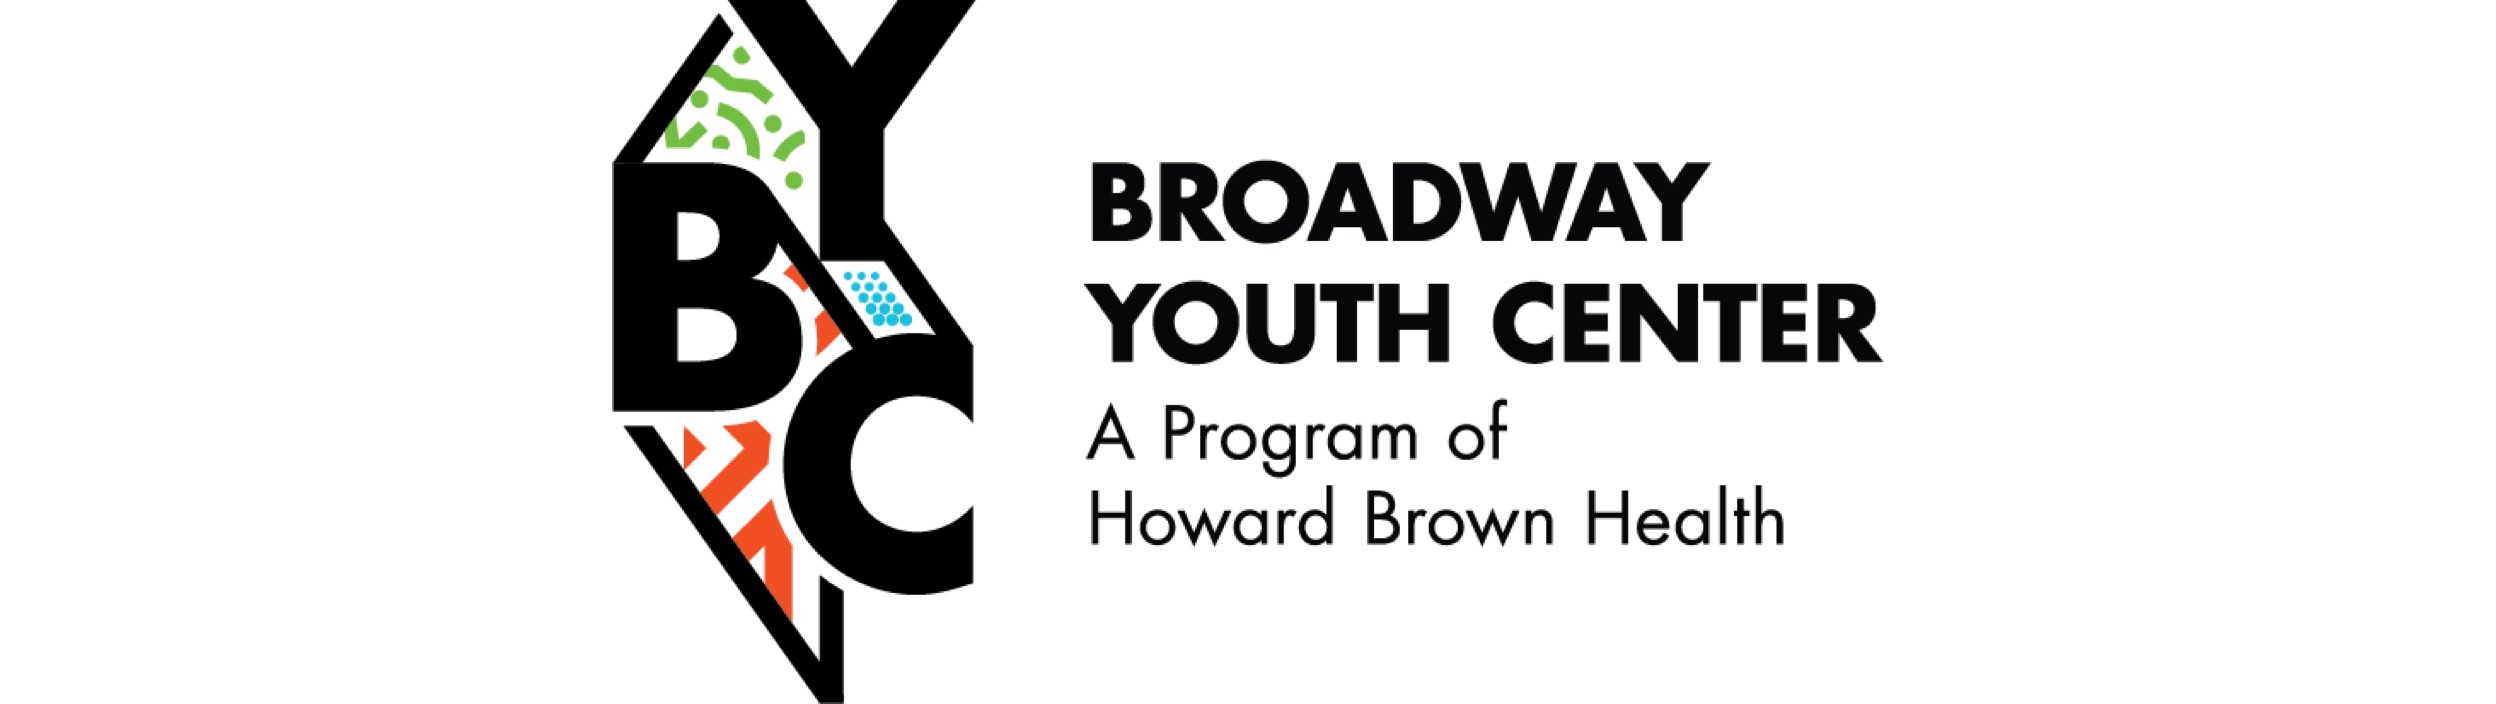 Broadway Youth Center - BYC